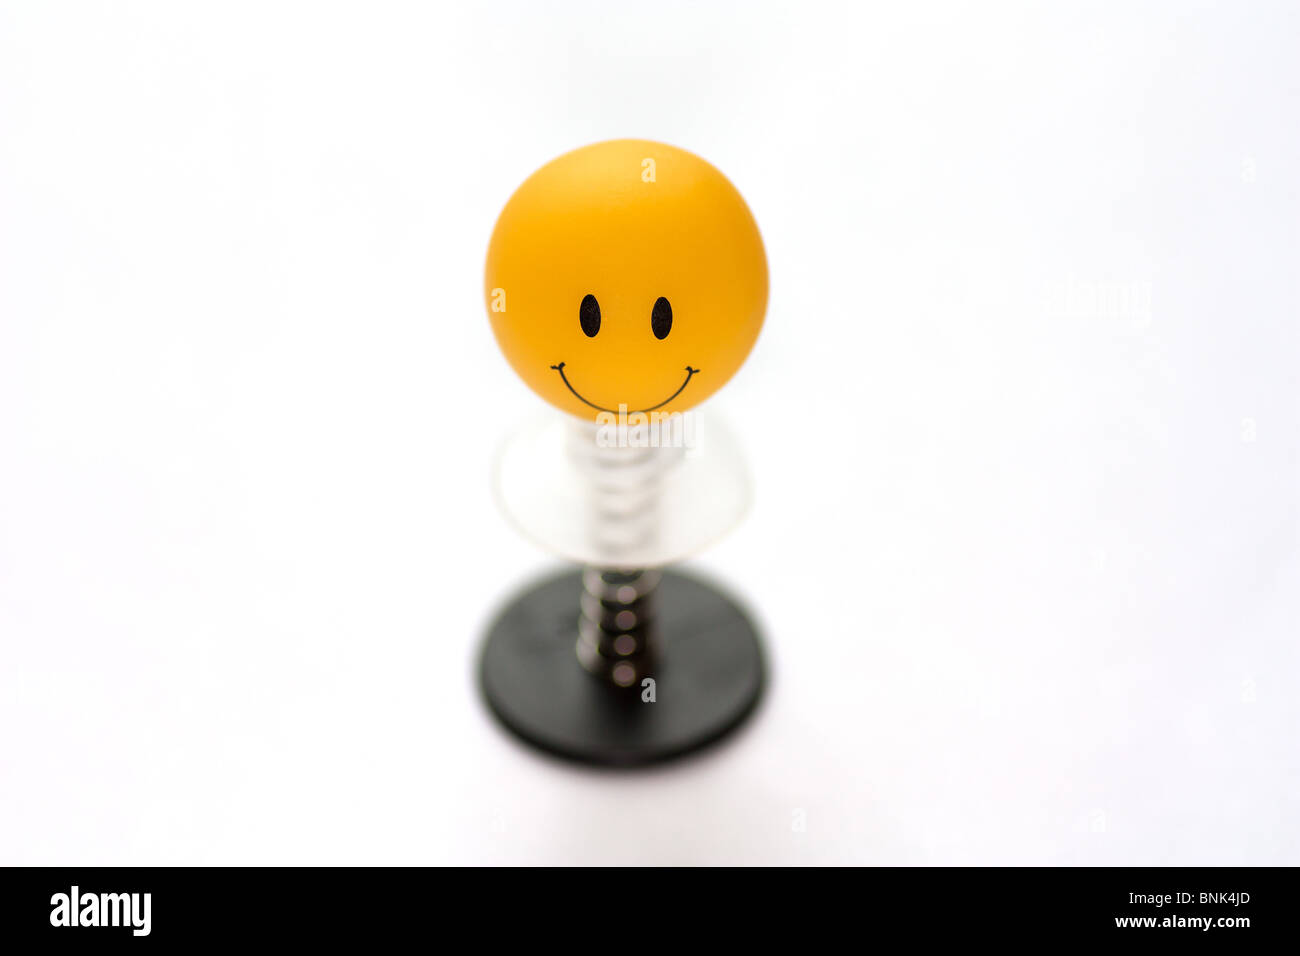 Smiley face against a white background Stock Photo